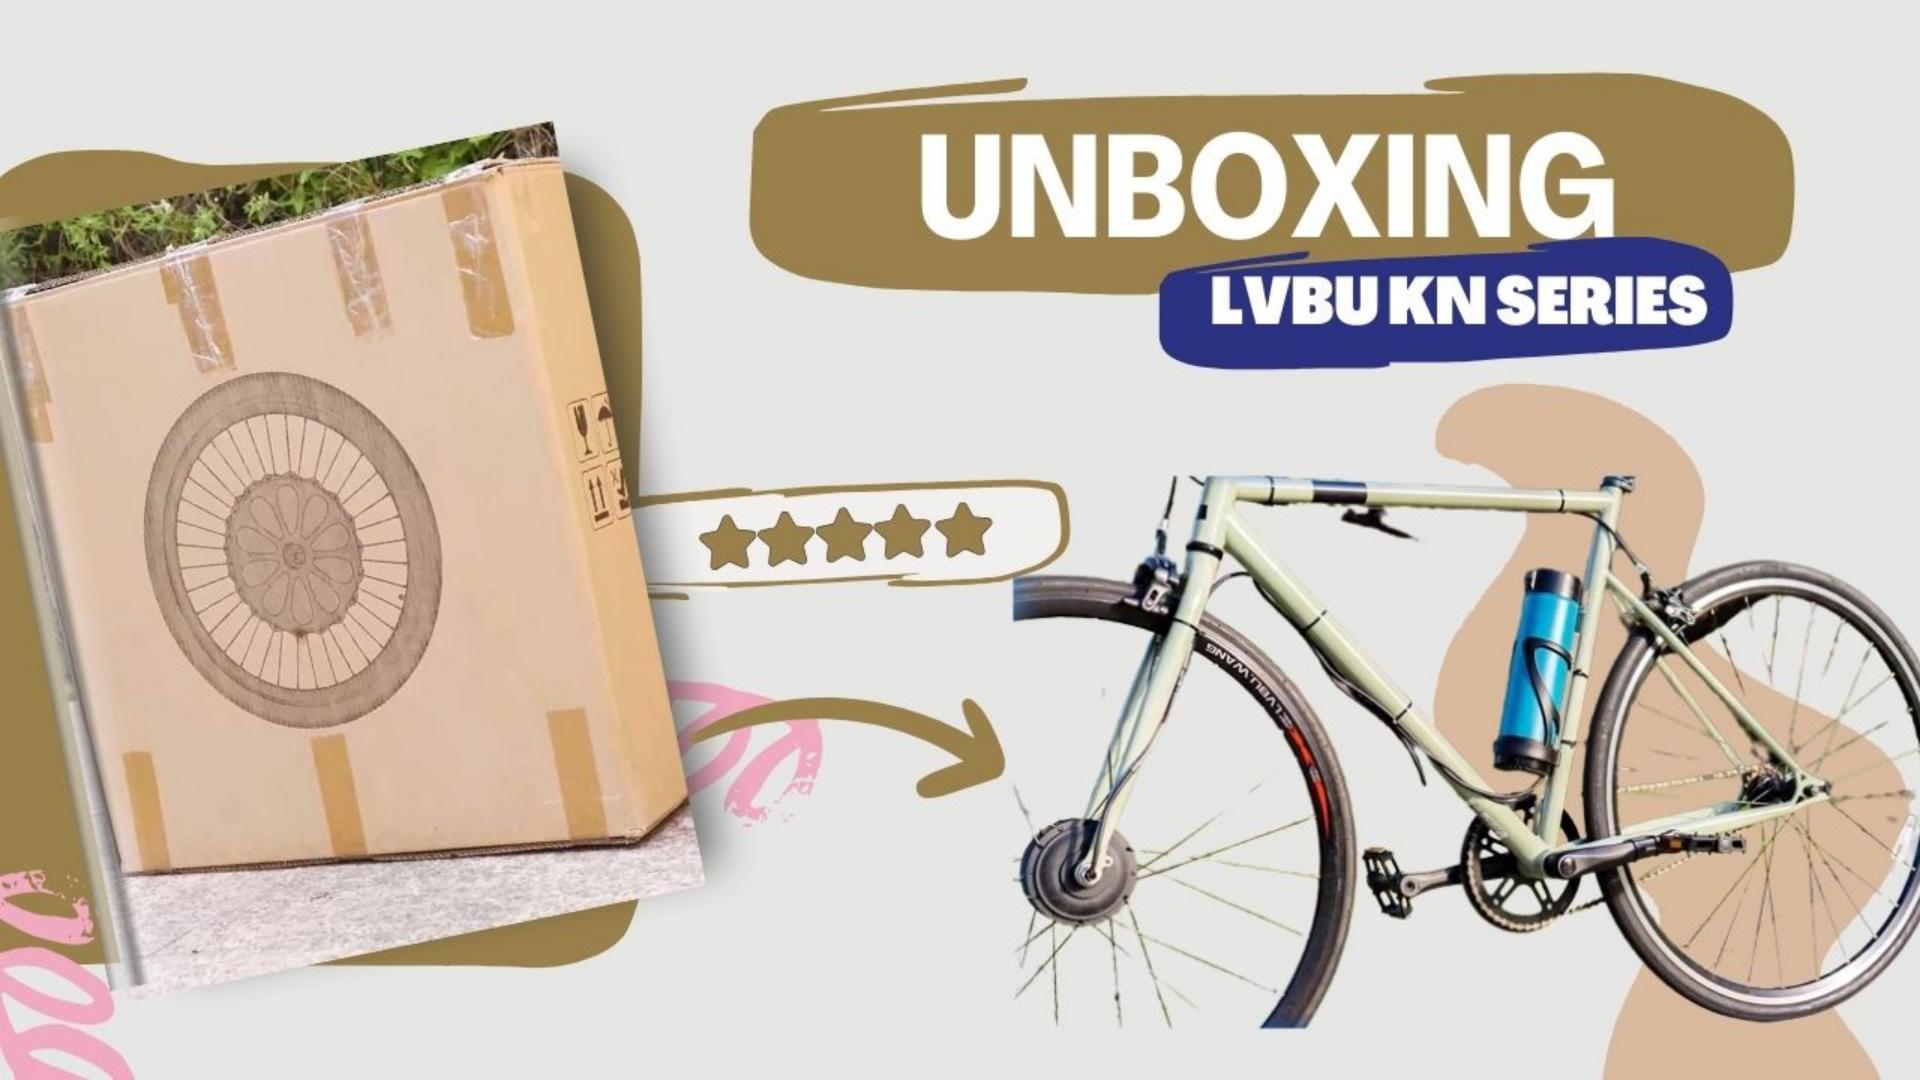 Unboxing Video ‖ Guess what's in the box